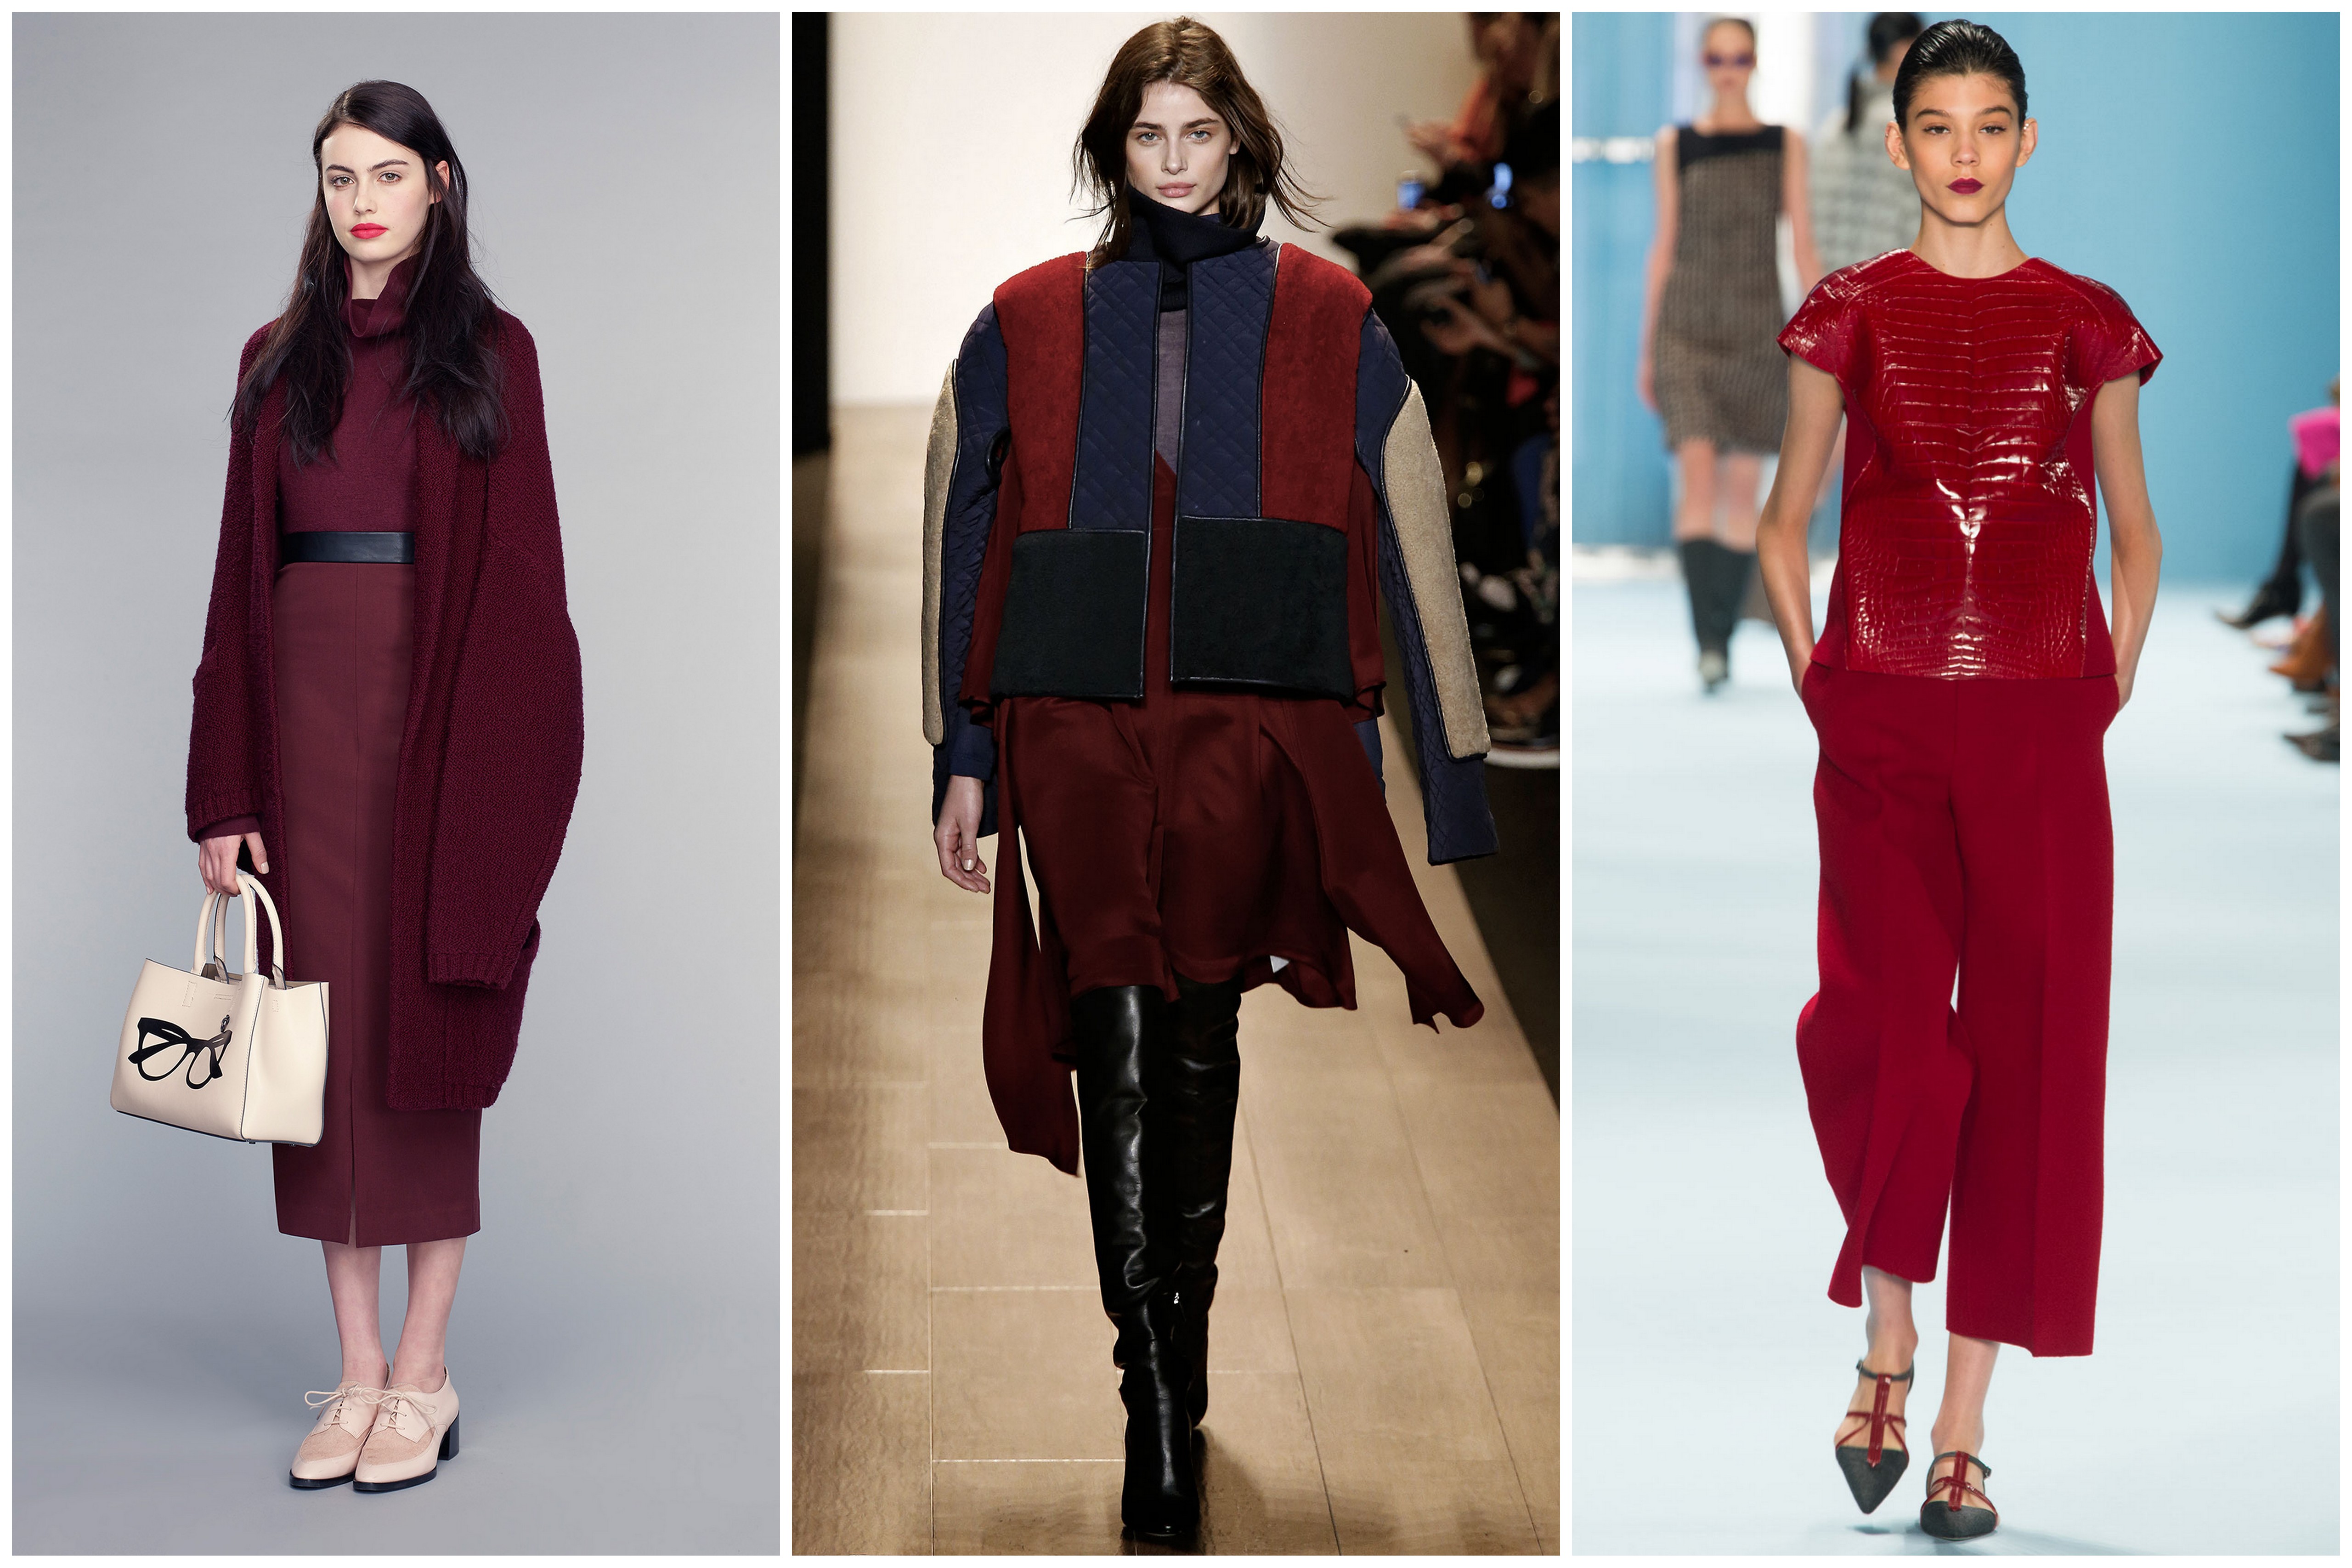 MARSALA - COLOR OF 2015 - FALL 2015 - WOMENSWEAR TRENDS - STREETTROTTER